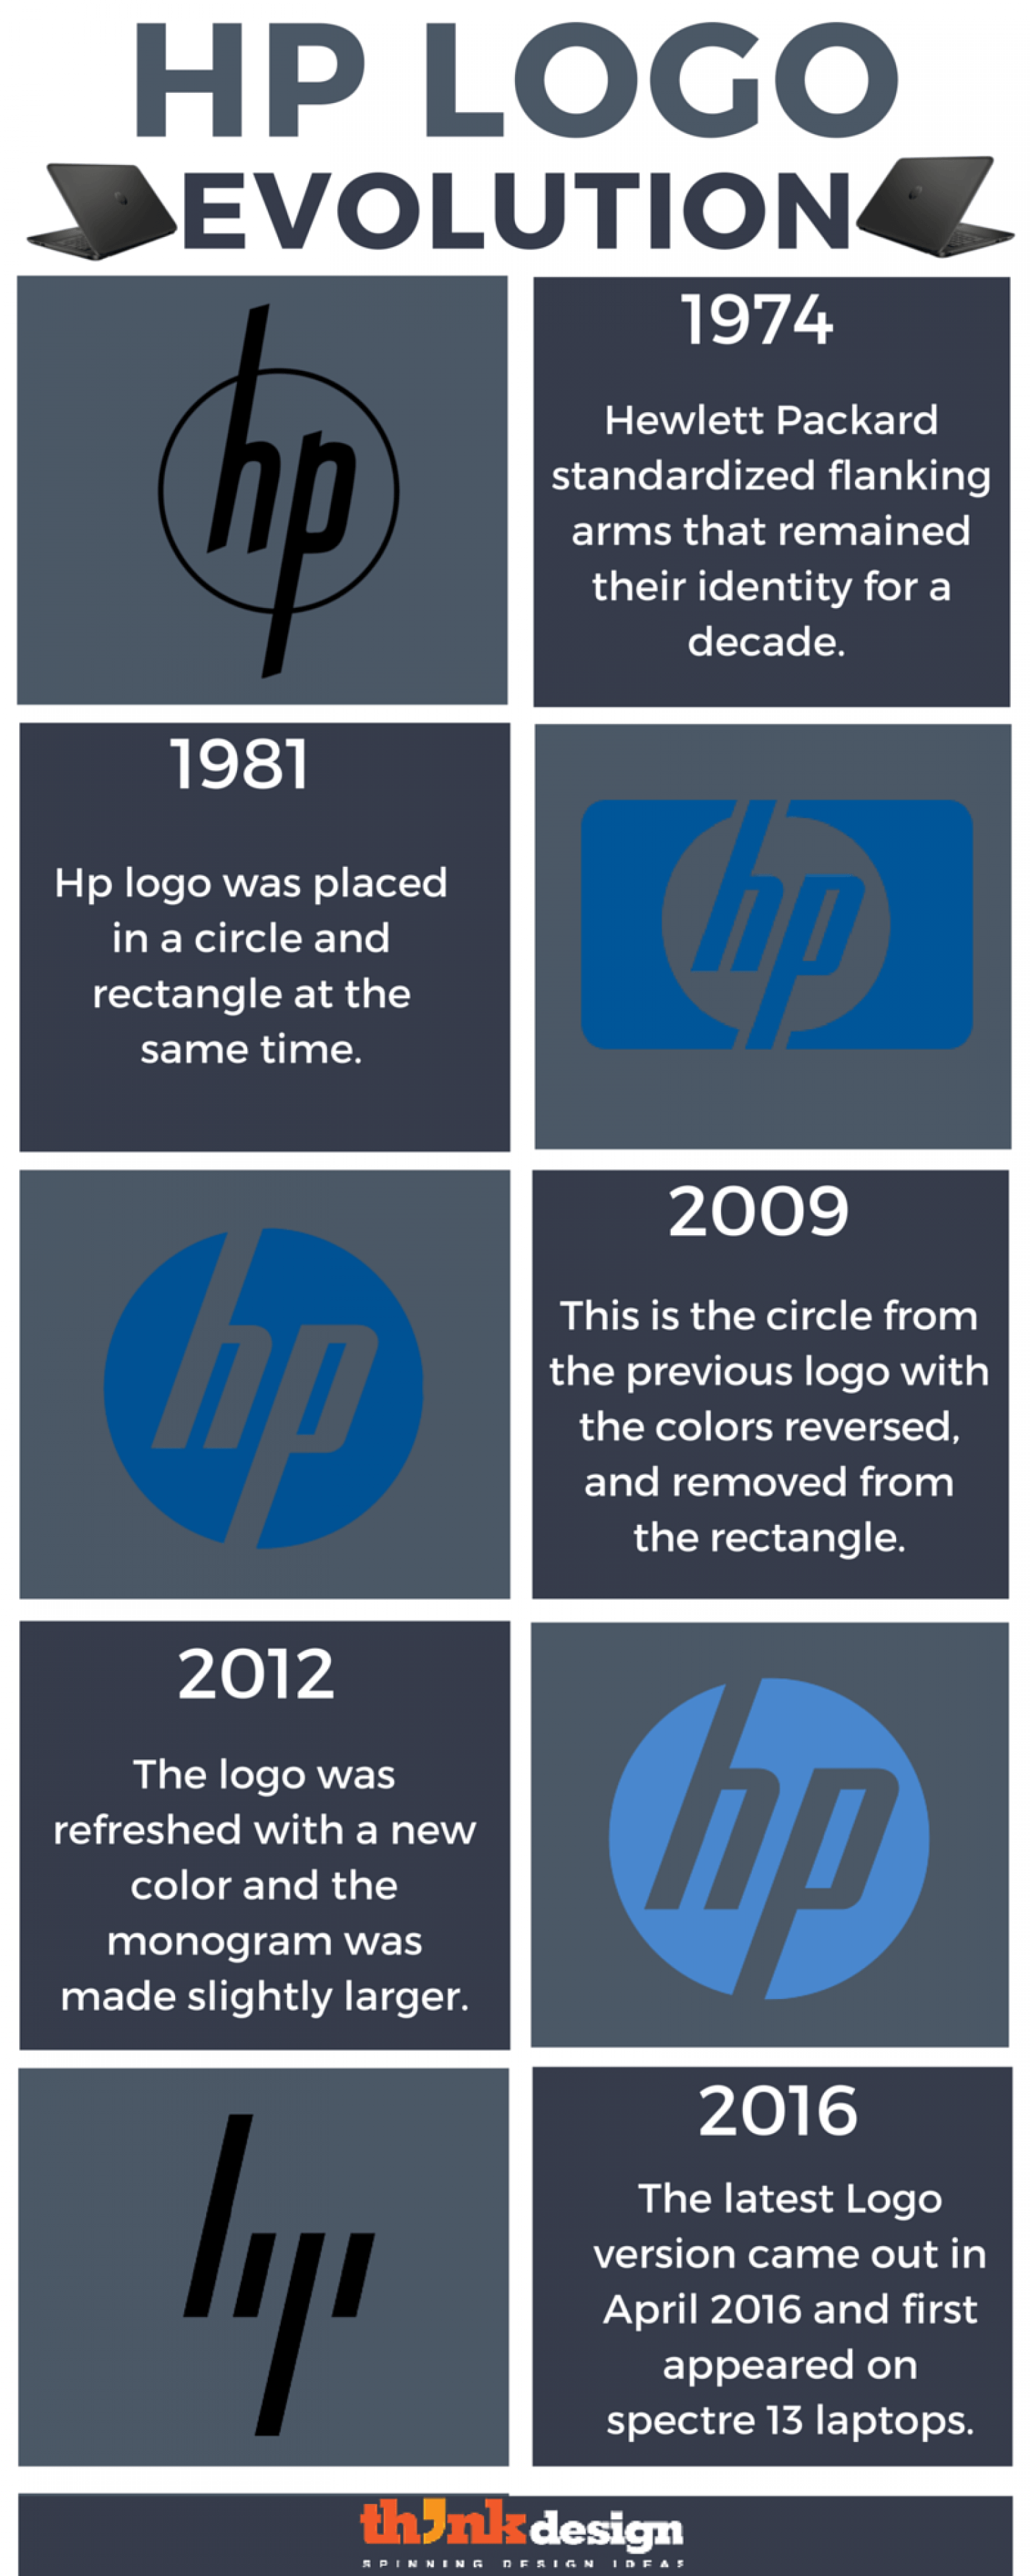 New HP Logo - HP Logo Evolution - The Journey of an Iconic Logo | Visual.ly